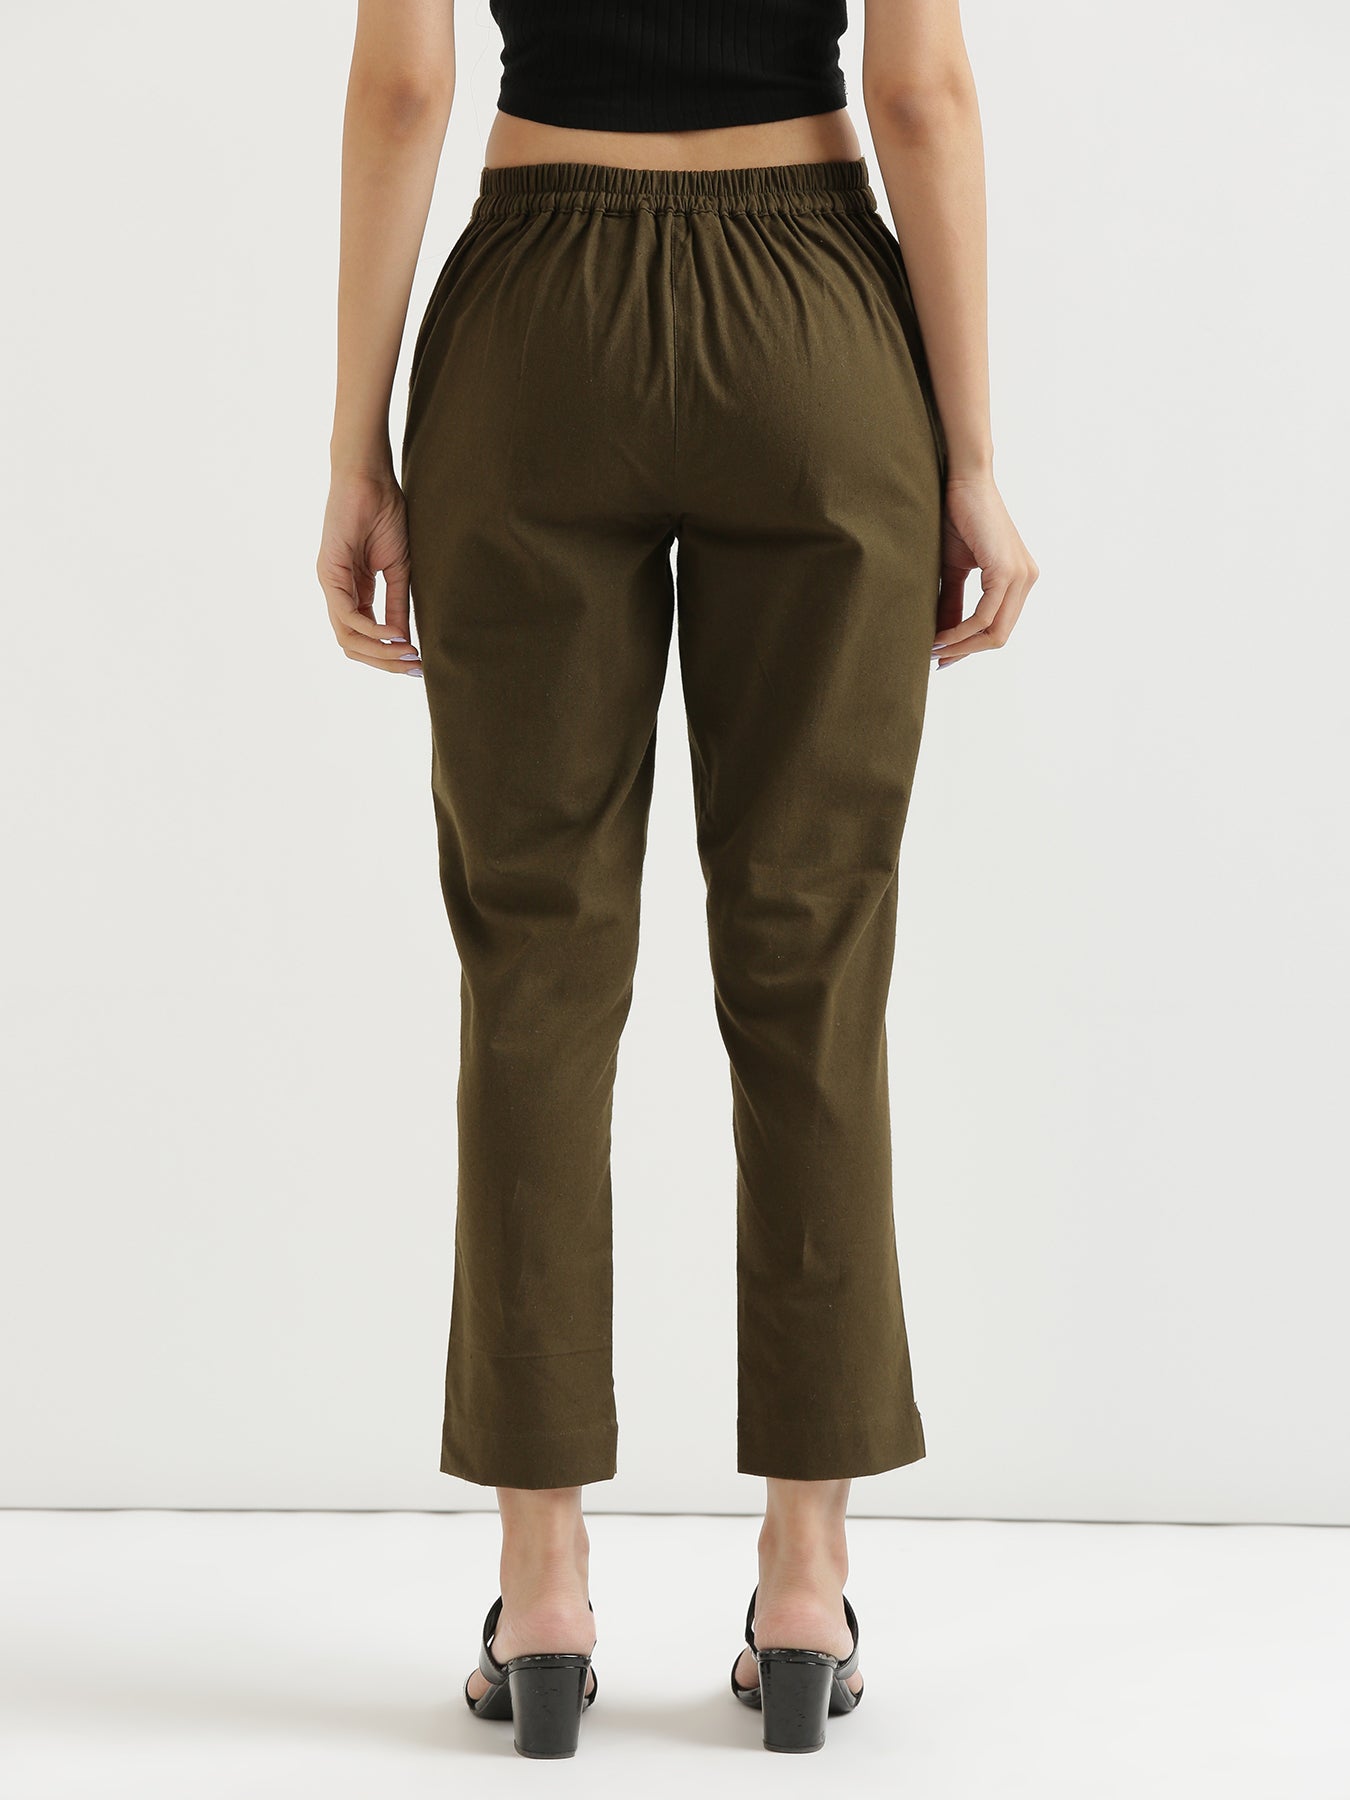 Buy Olive Green Trousers & Pants for Men by GAS Online | Ajio.com